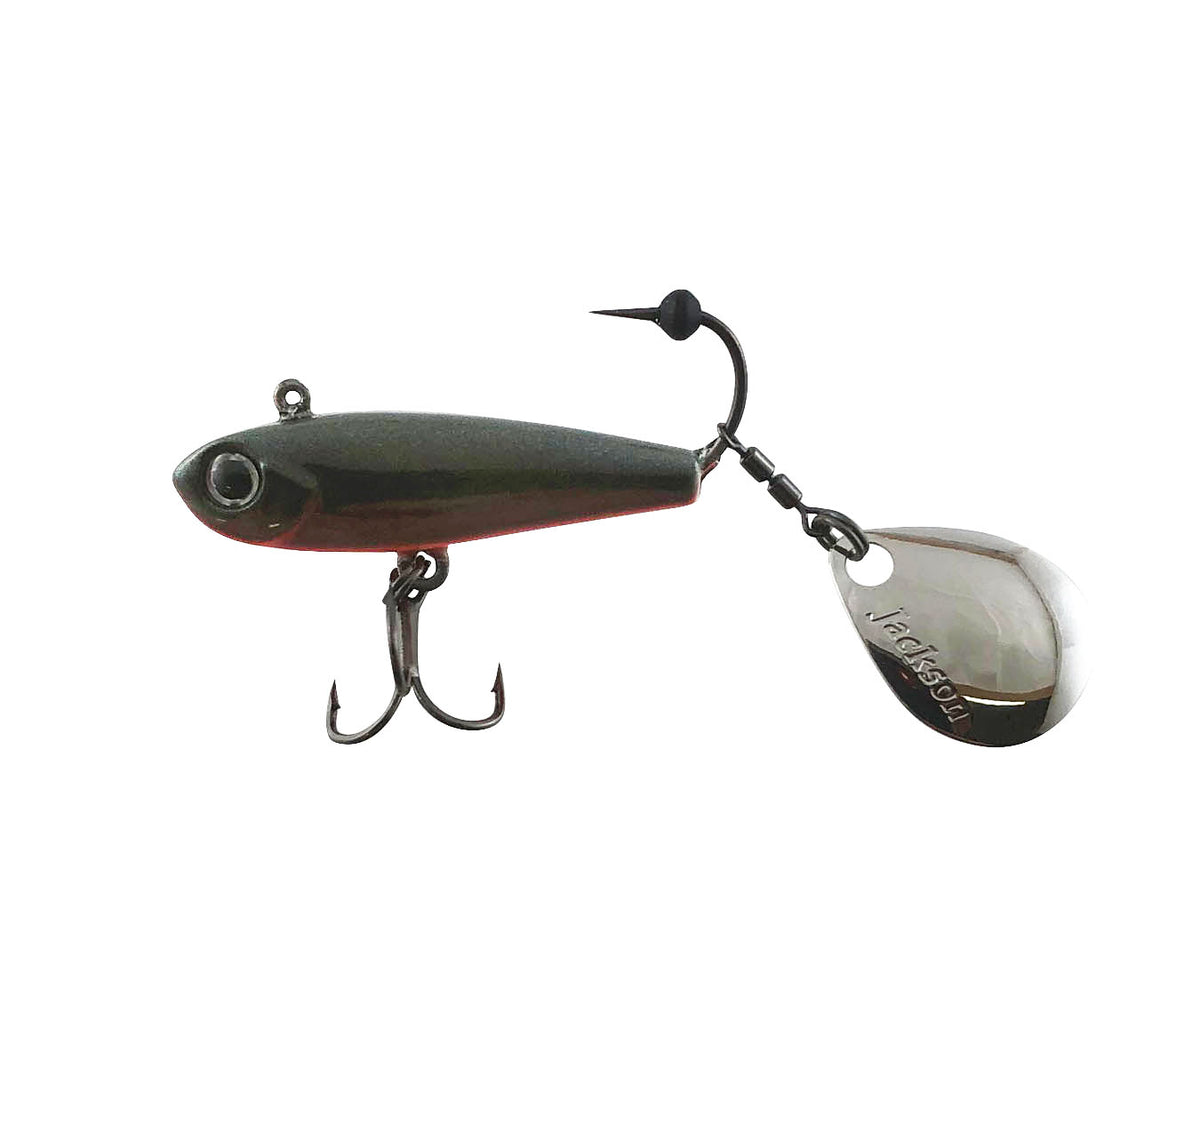 Jackson Iga Jig Spin 7g Lures - 2 Pack